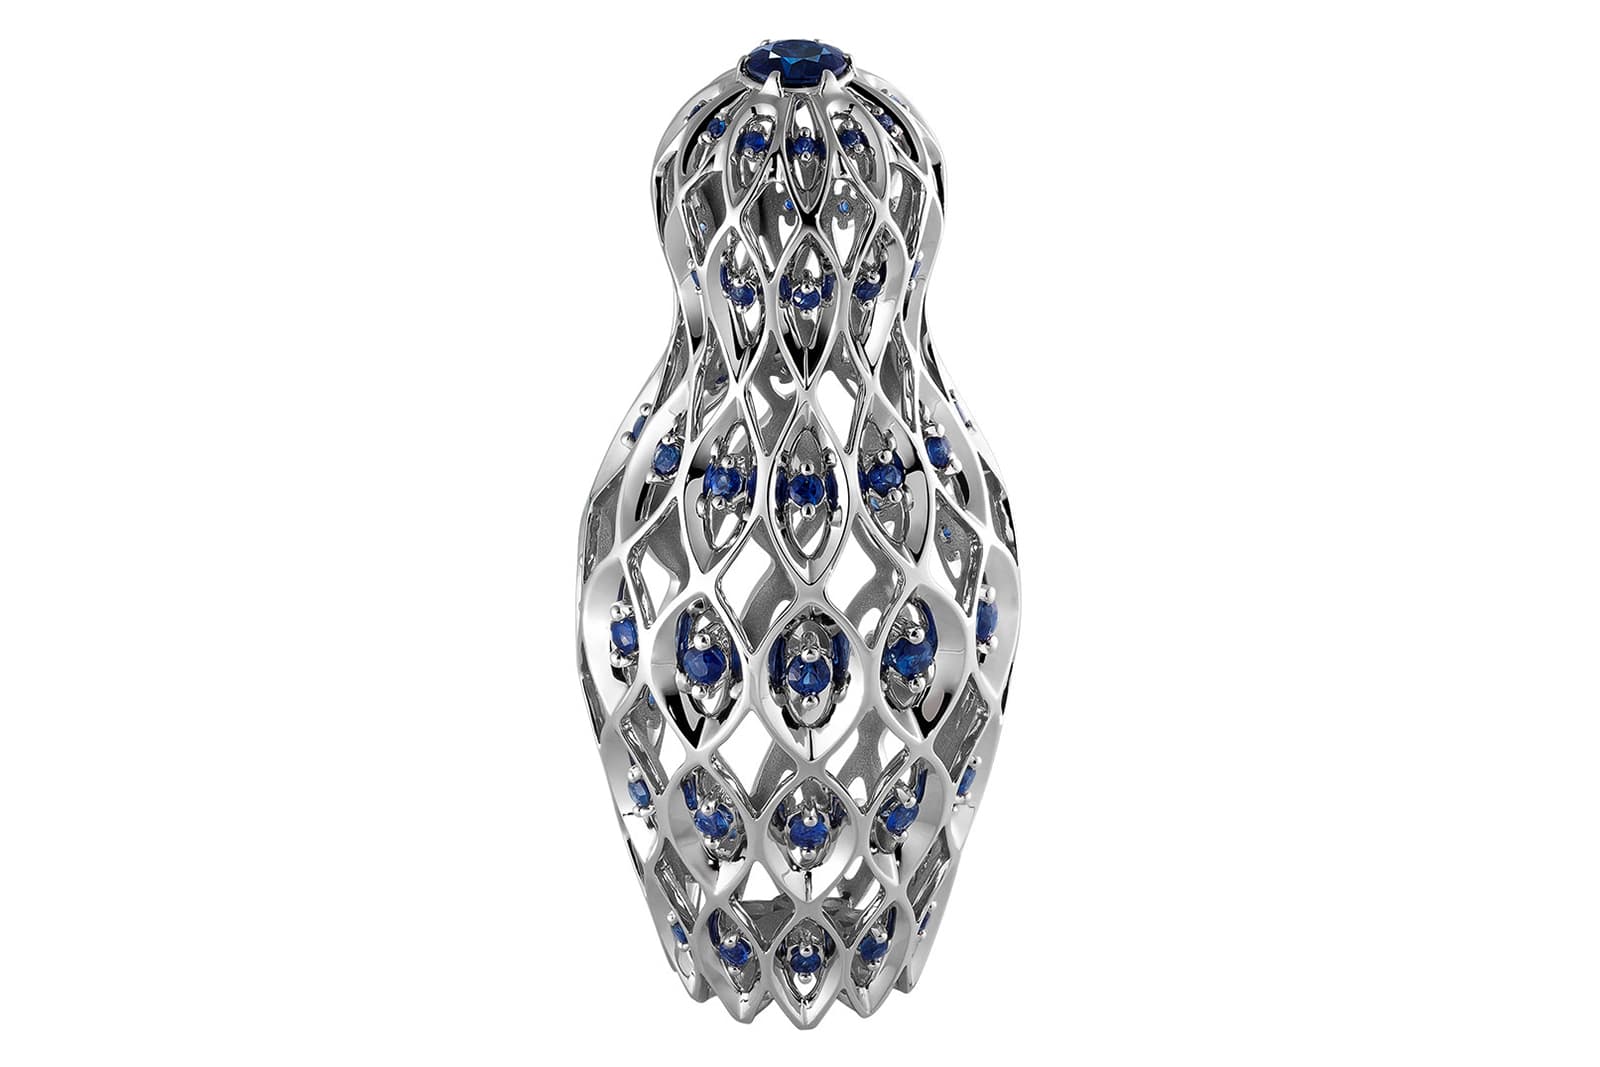 Maksim Basmanov's 'In all its Glory' pendant from Ringo's 'Matrena de Ural' collection with sapphires in white gold